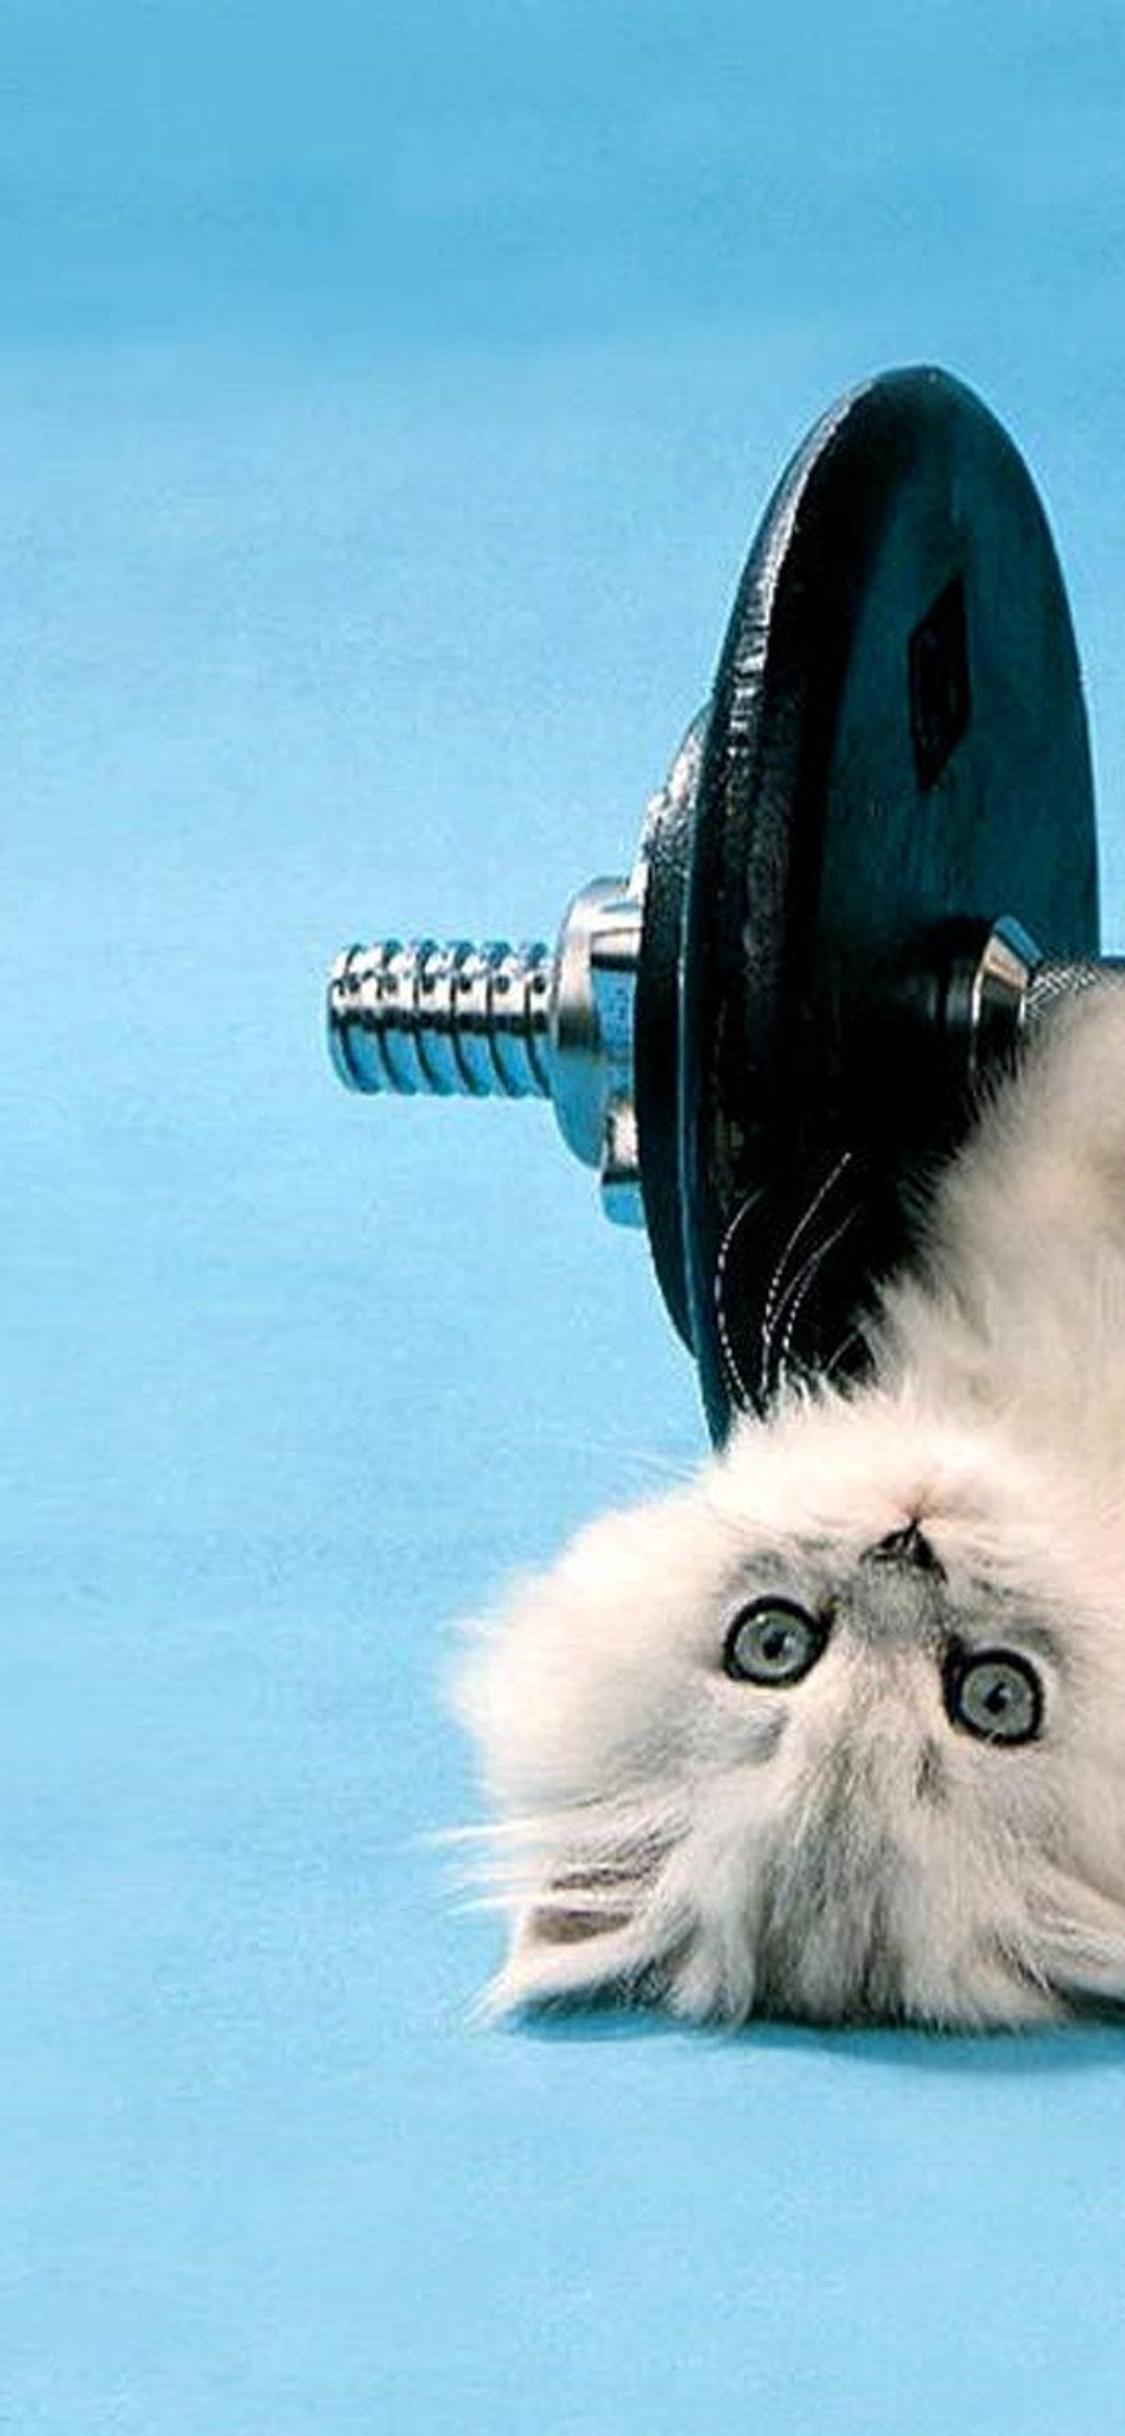 Cute white cat lifting weights - Cat at gym